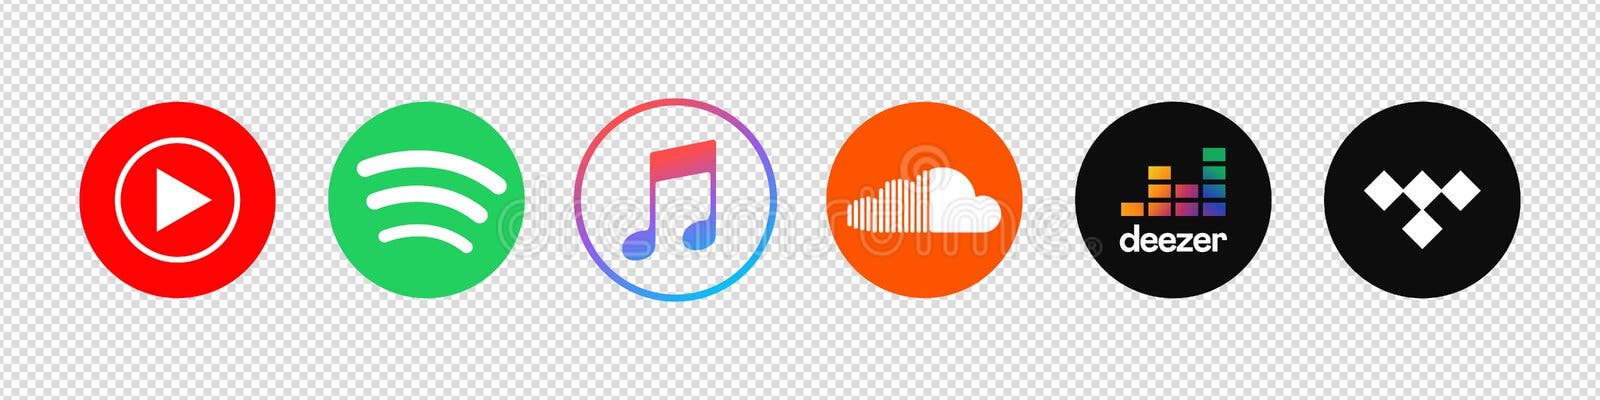 Music stream icon line cloud. Isolated symbol online education